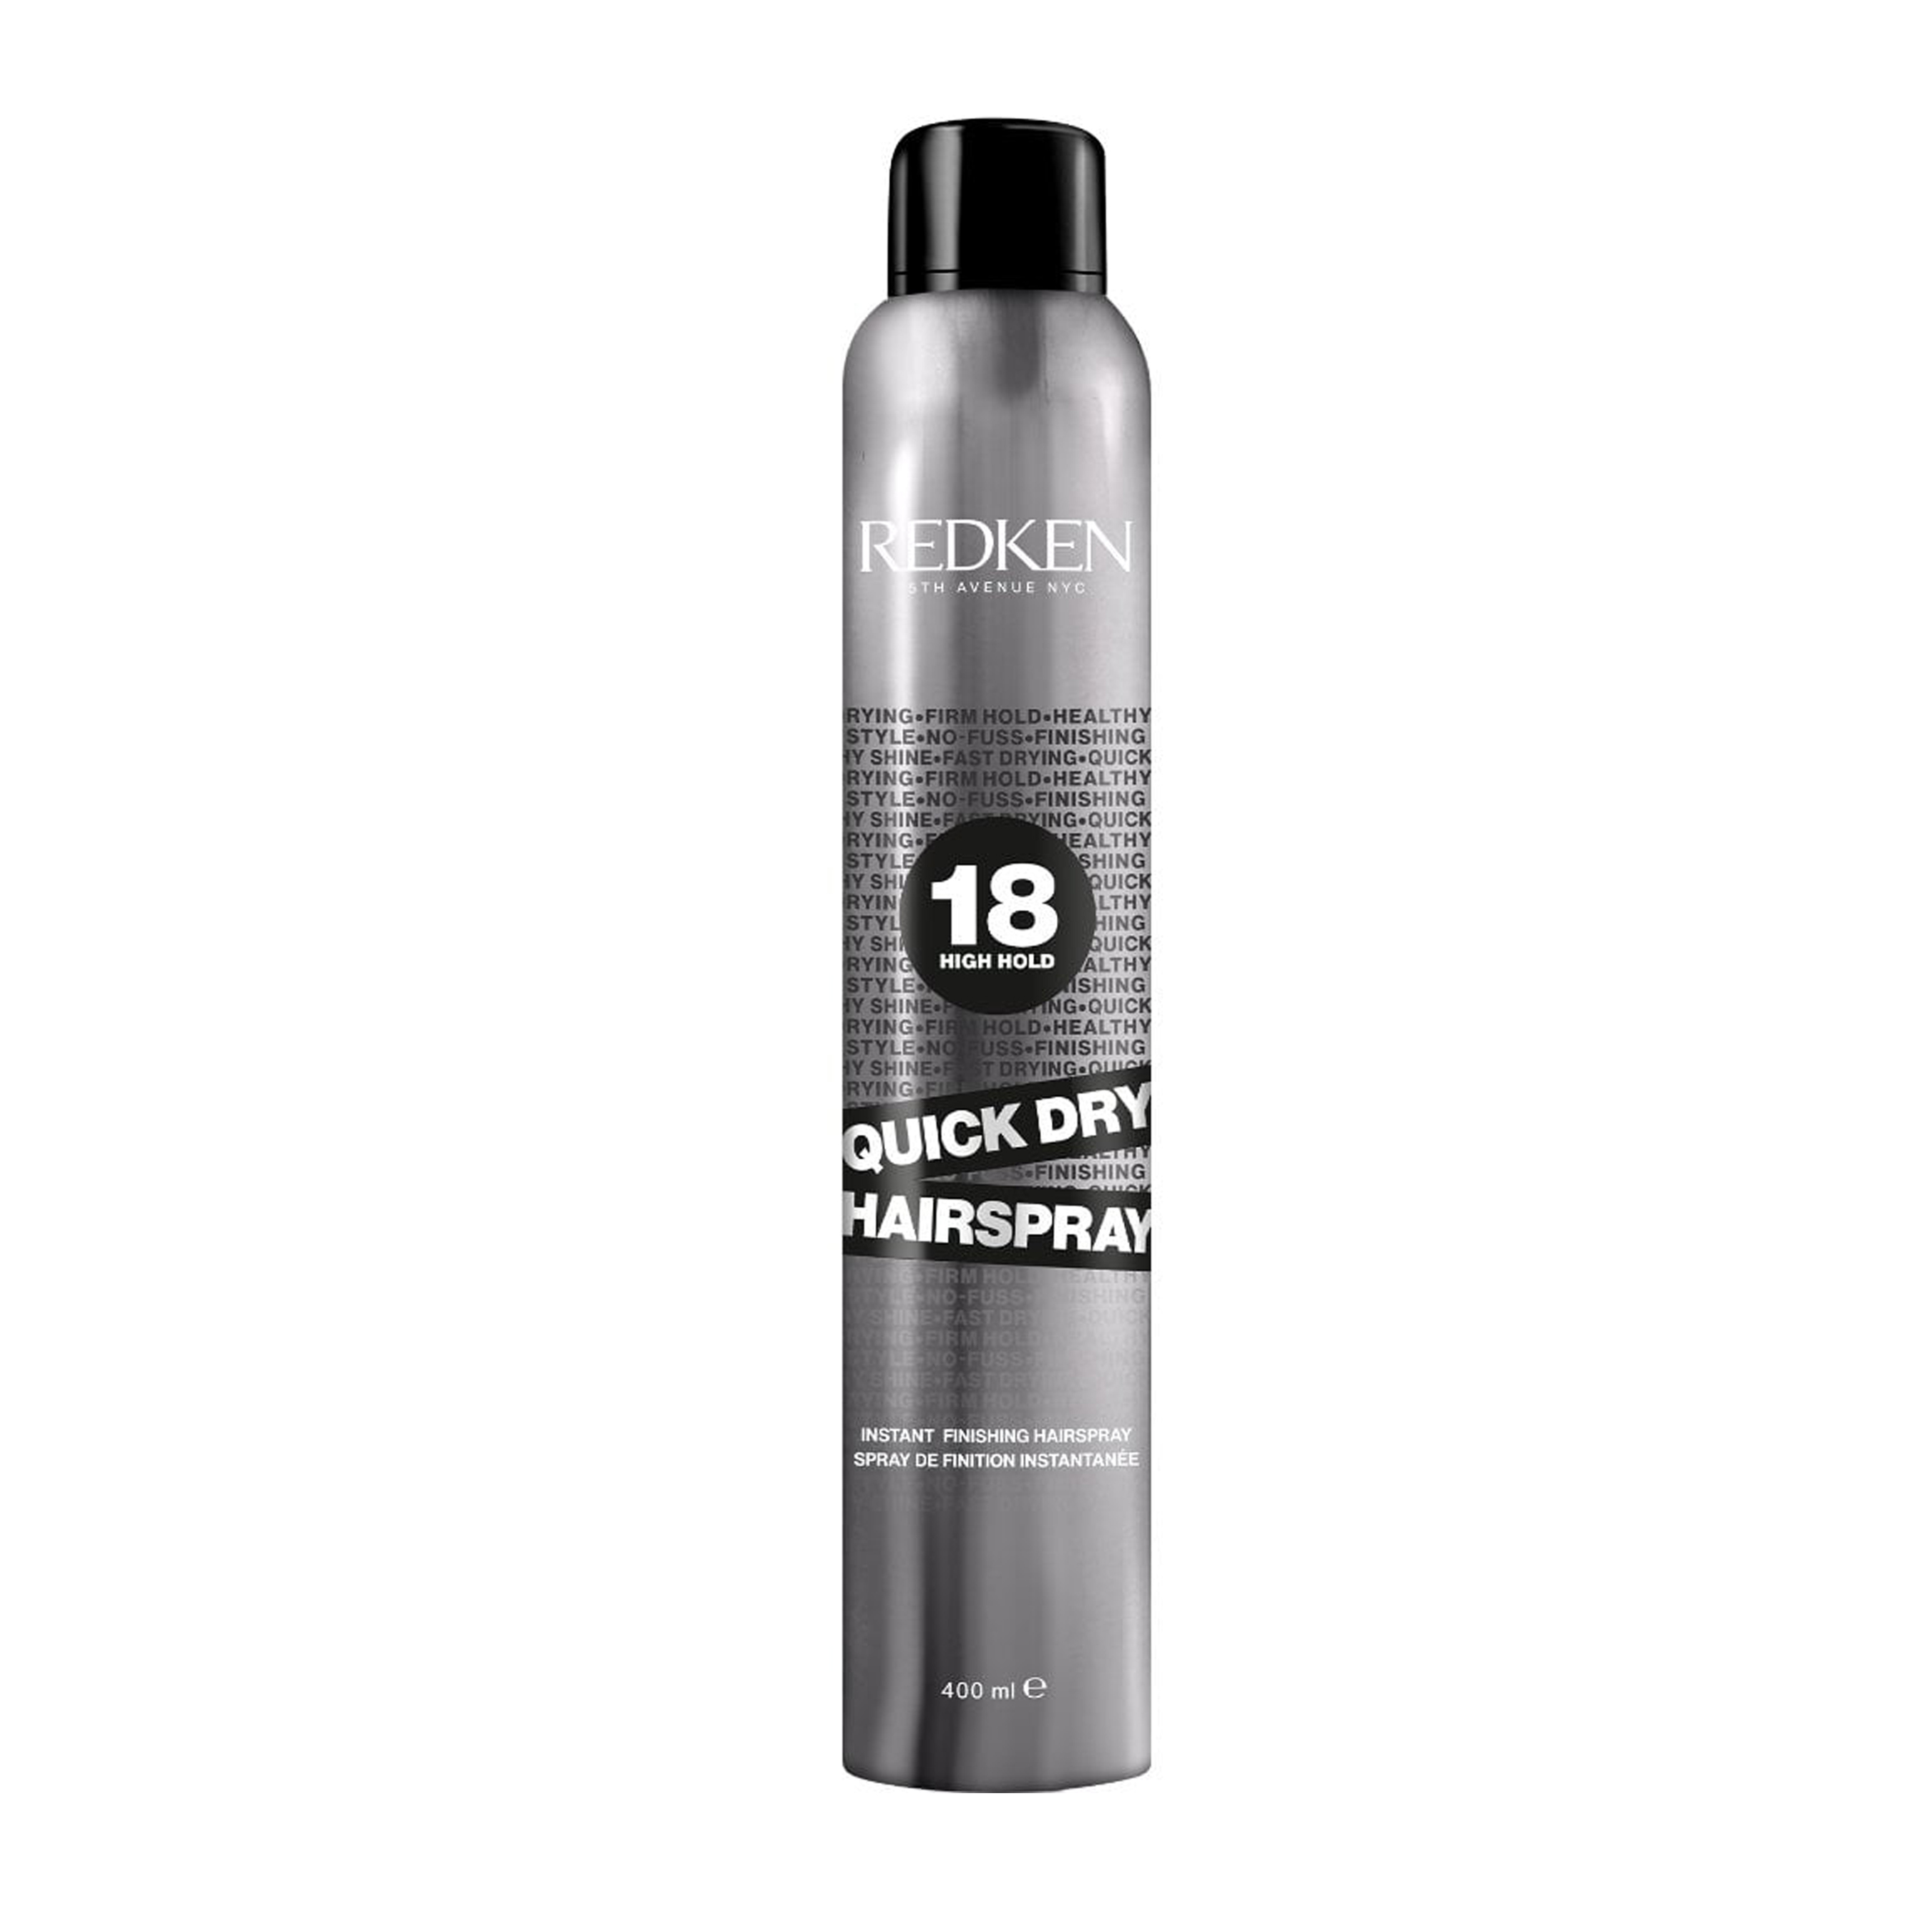 REDKEN QUICK DRY 18 INSTANT FINISHING HAIRSPRAY 9.8 OZ - image 1 of 5